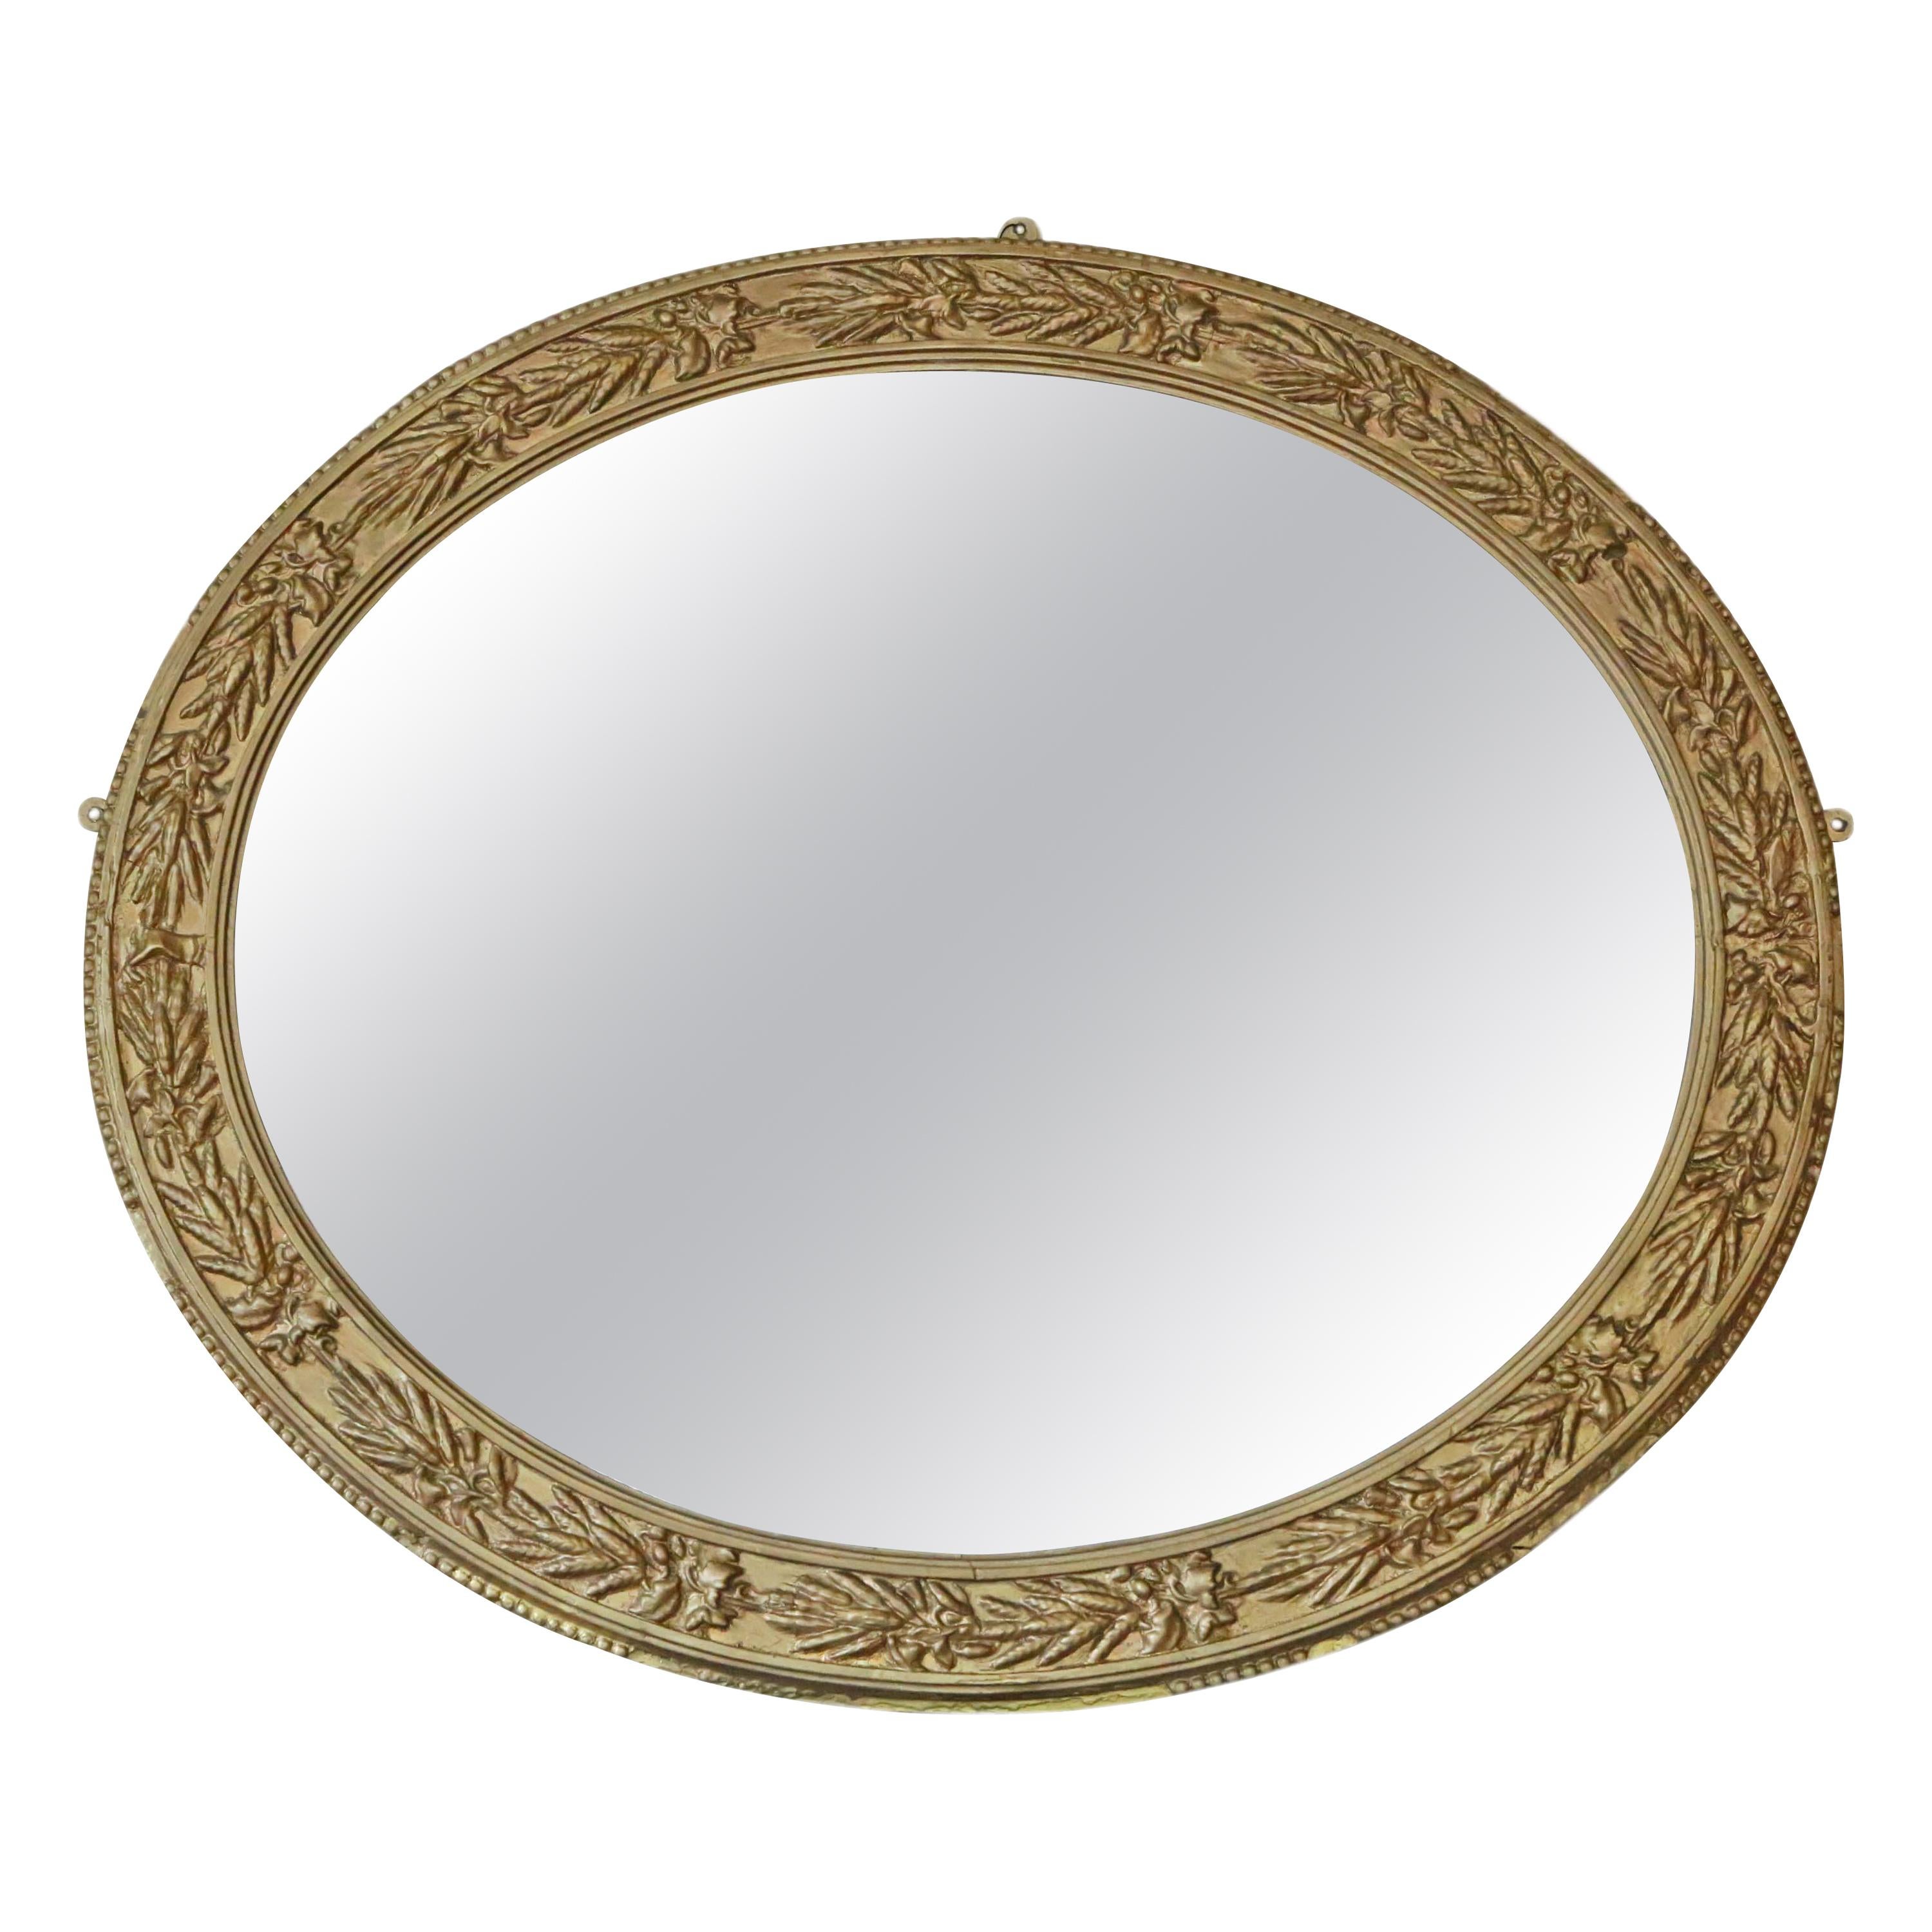 Large Oval Mid-19th Century Victorian Gilt Overmantle Wall Mirror